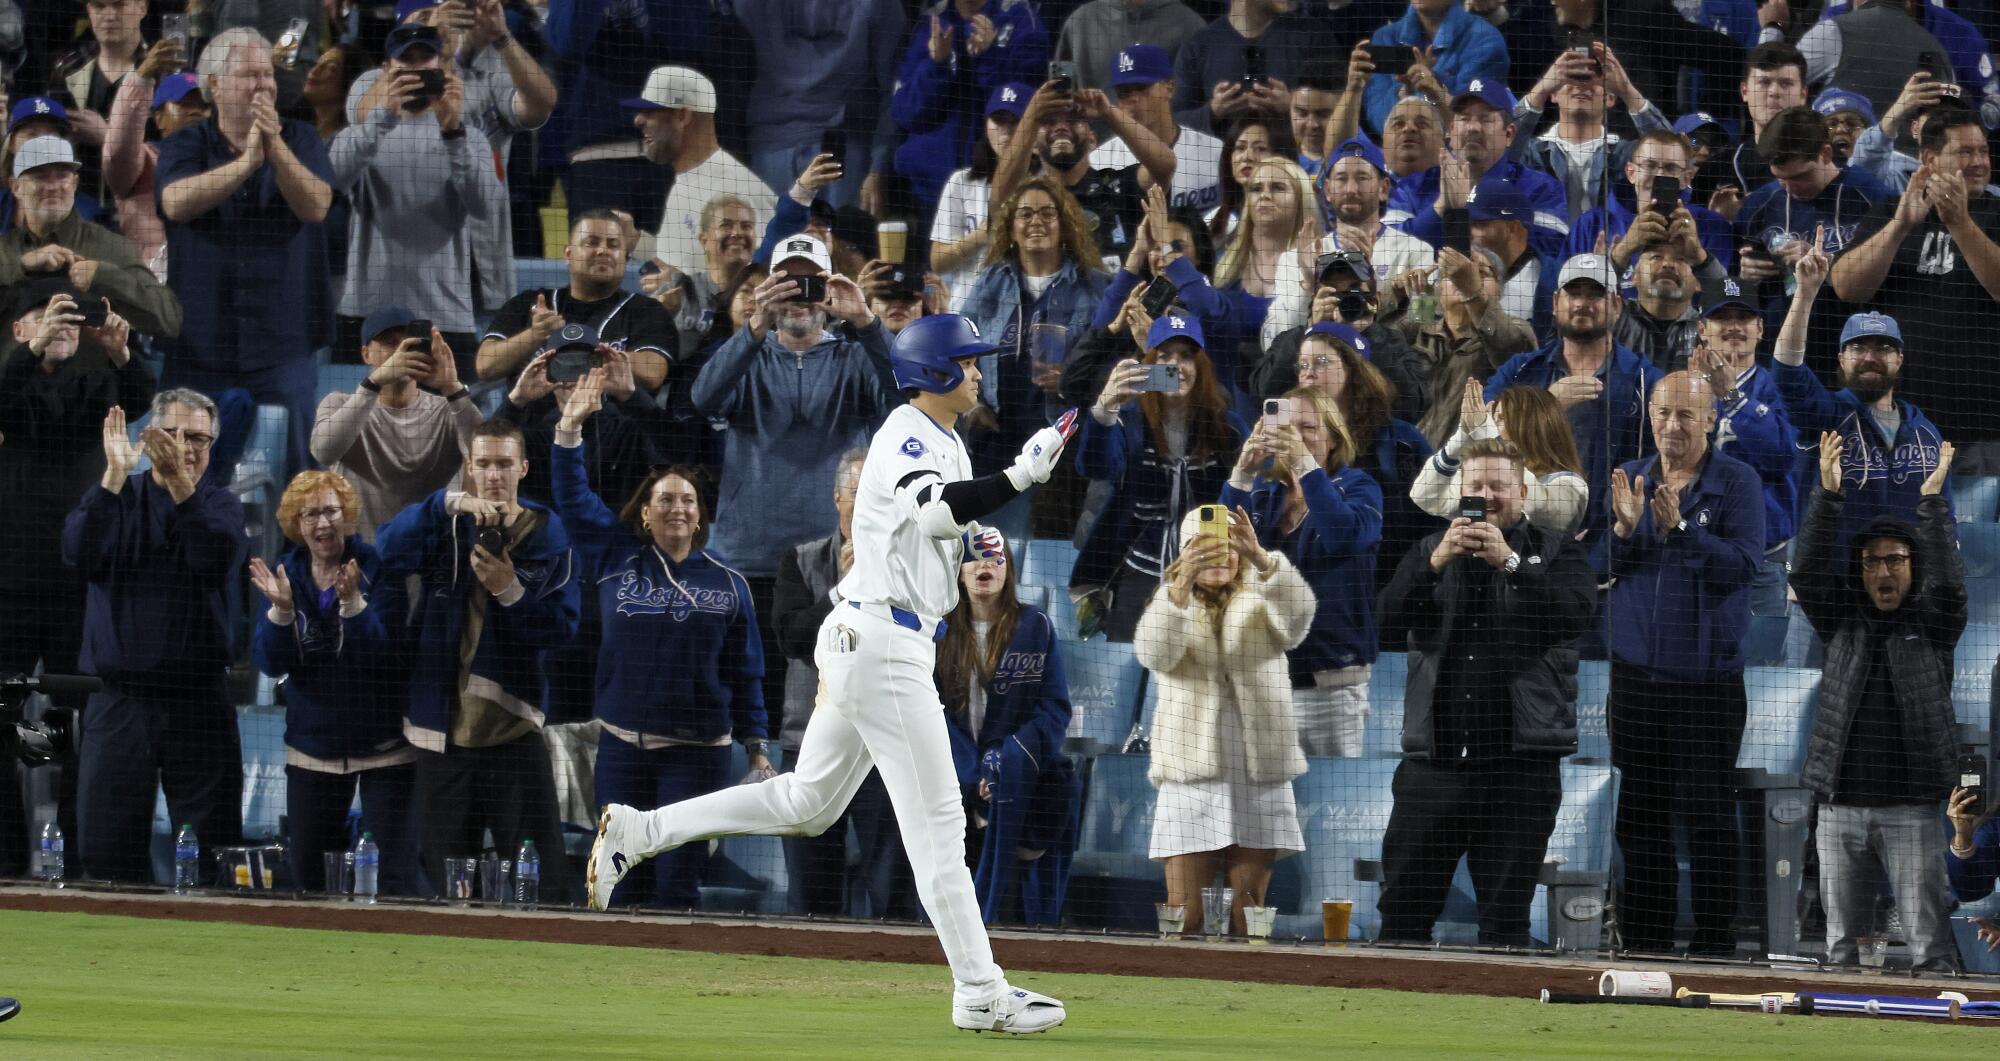 Fans applaud Shohei Ohtani as he heads to the dugout after hitting his first homer with the Dodgers.